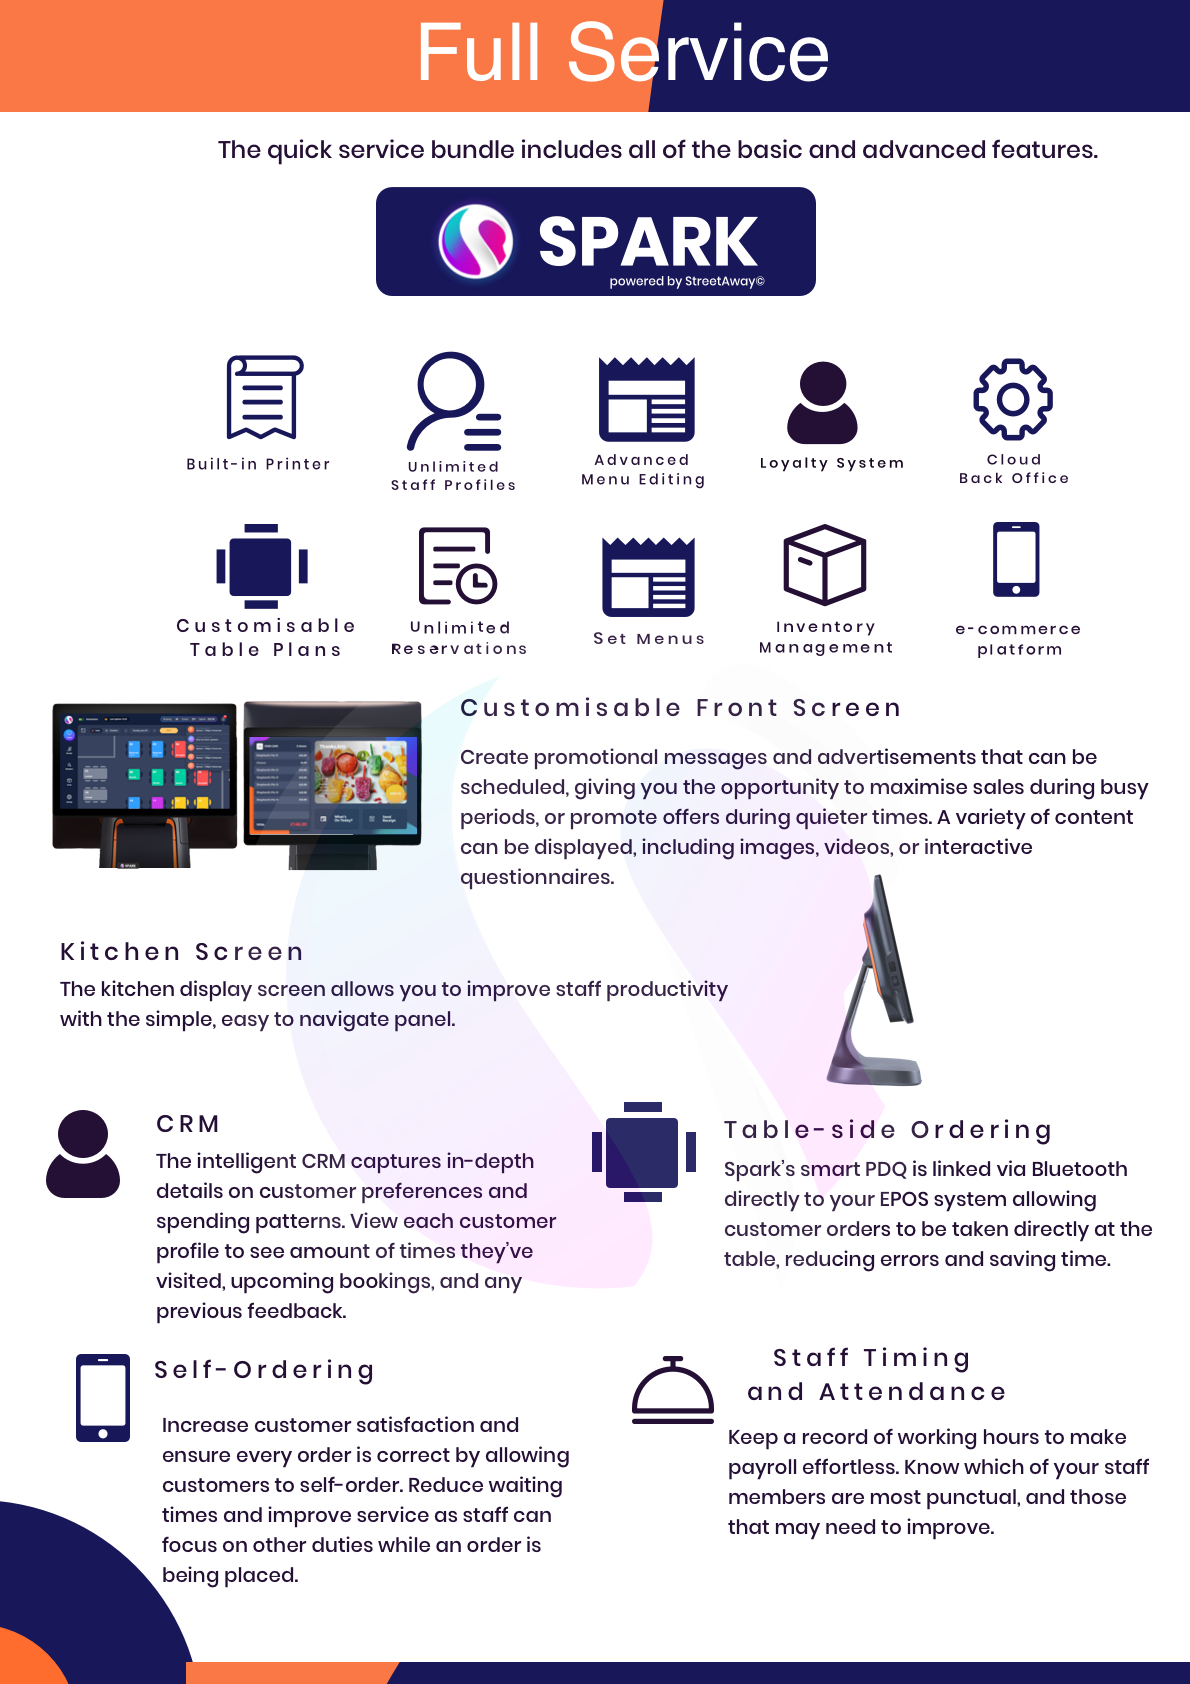 spark full service bundle summary of features